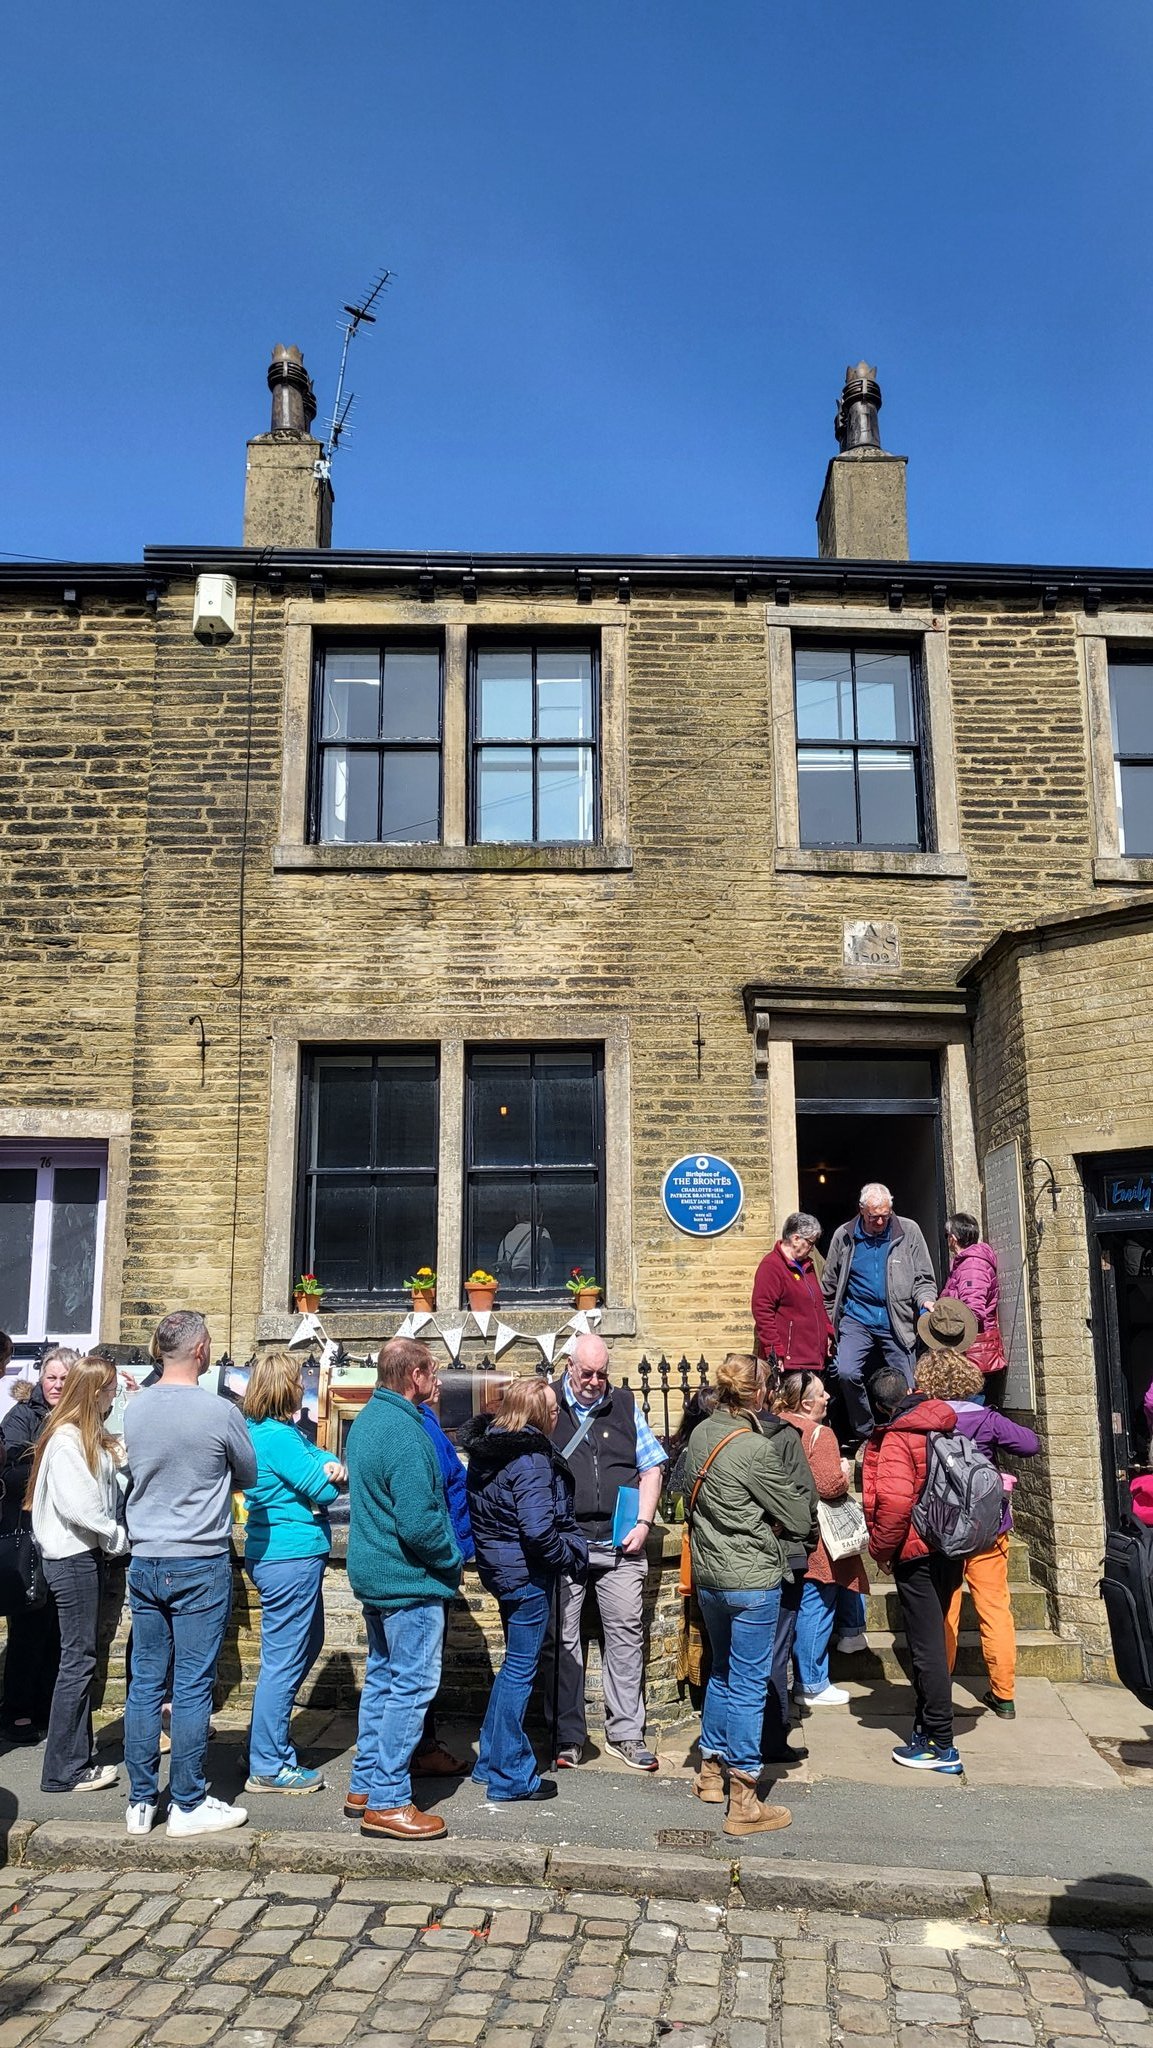 Crowds queuing outside the Bronte Birthplace